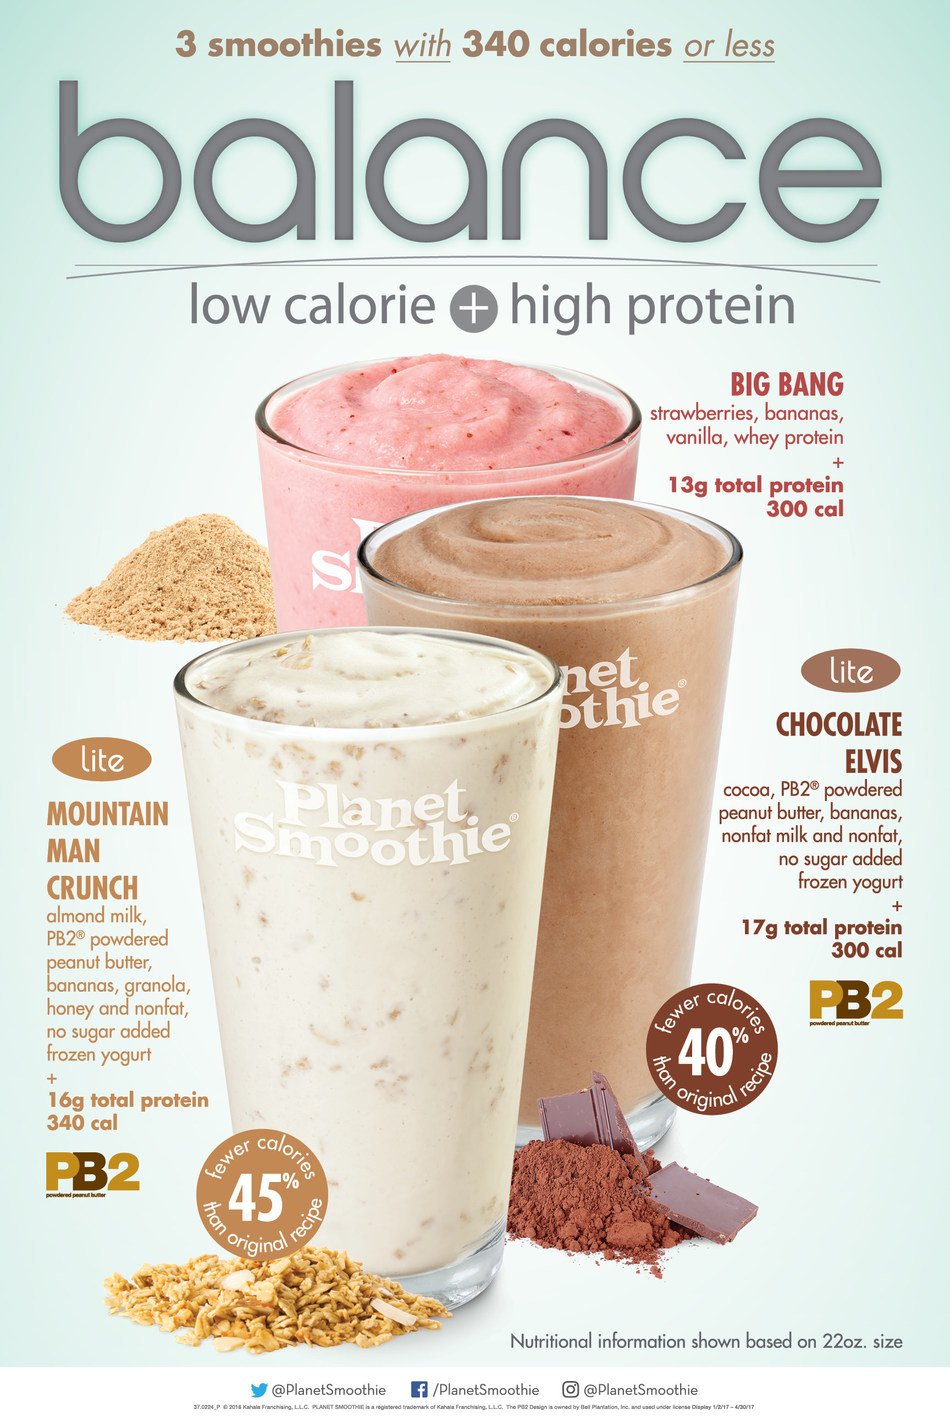 Planet Smoothie Features Three Low Calorie, High Protein Smoothies